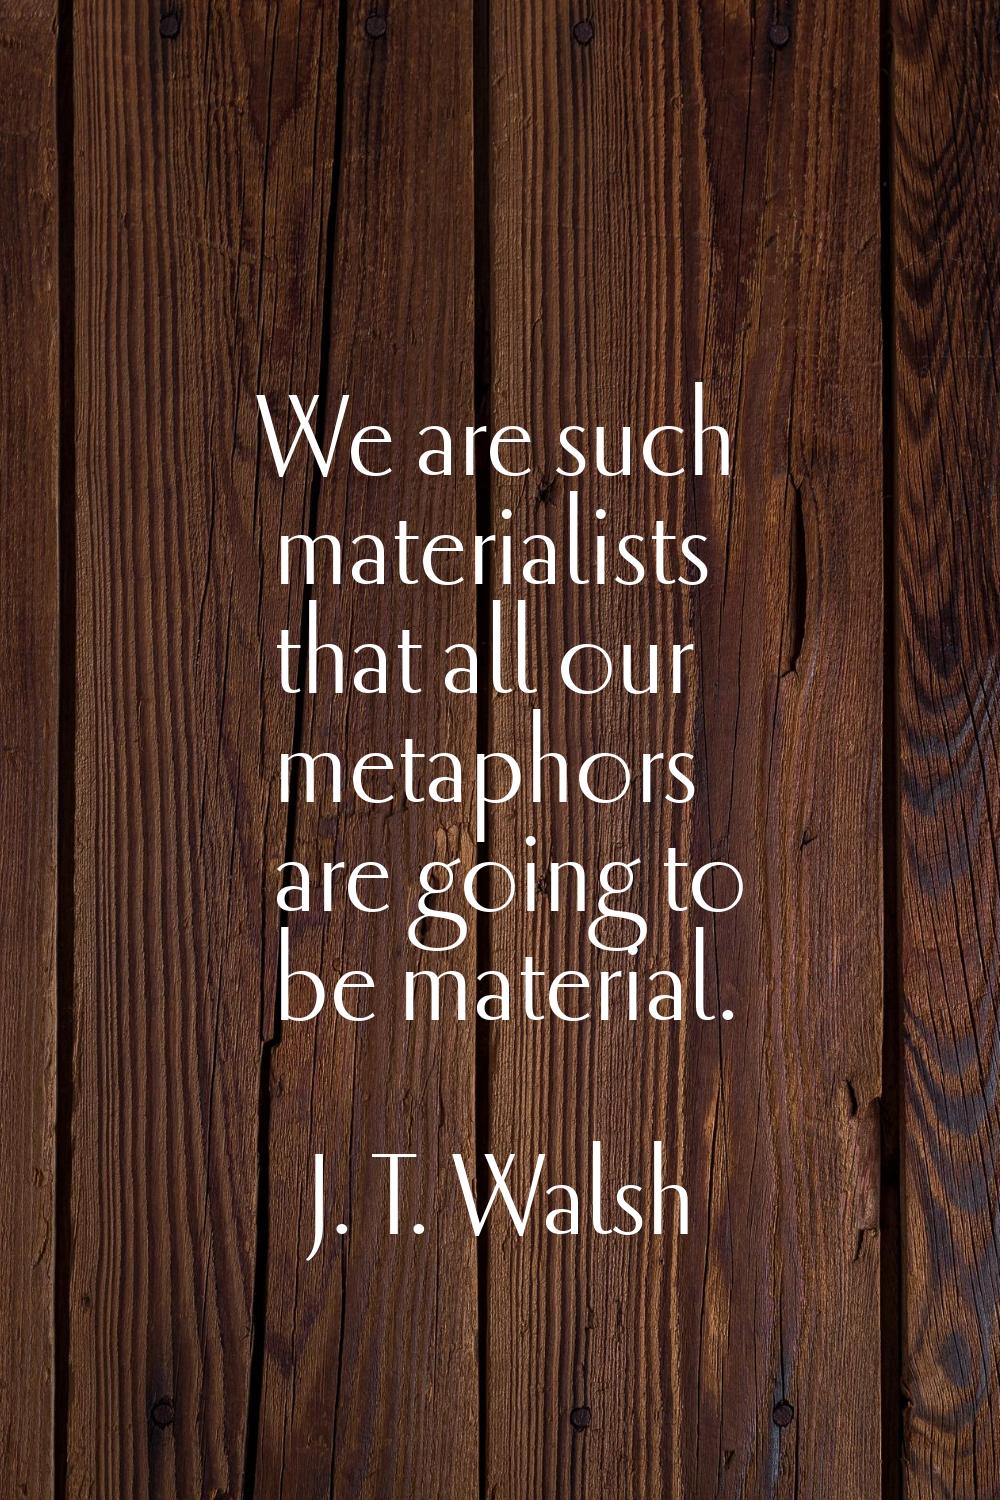 We are such materialists that all our metaphors are going to be material.